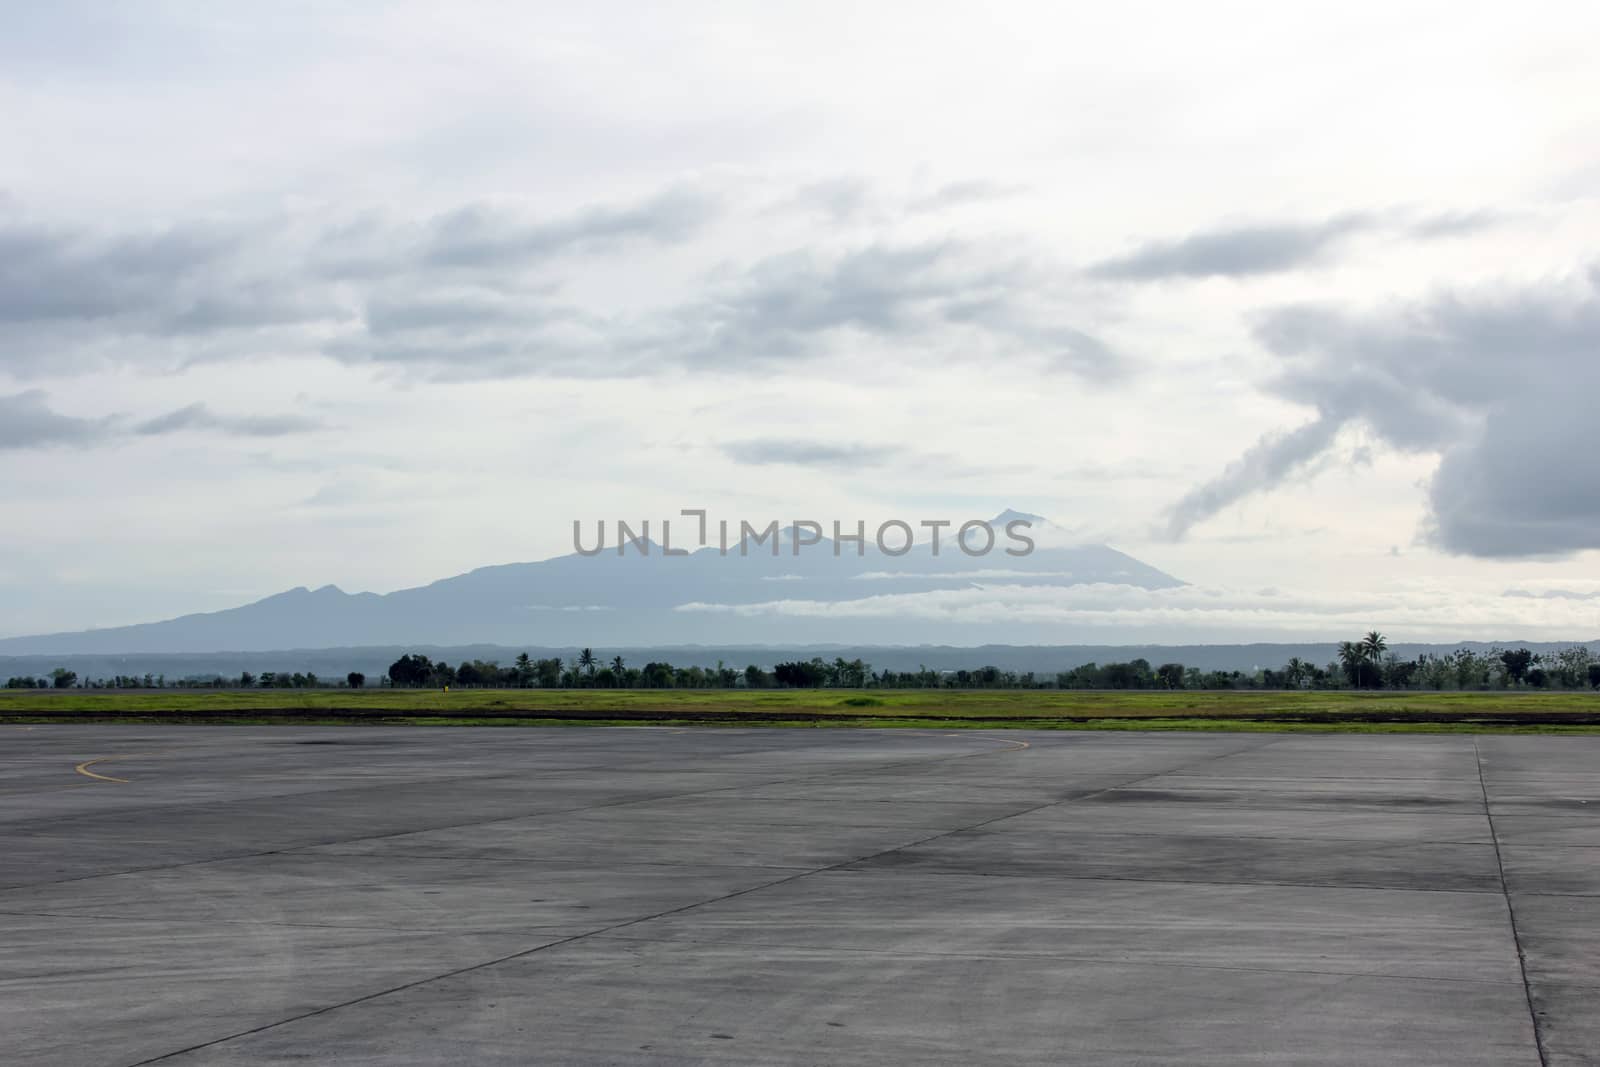 Runway with mountain by liewluck